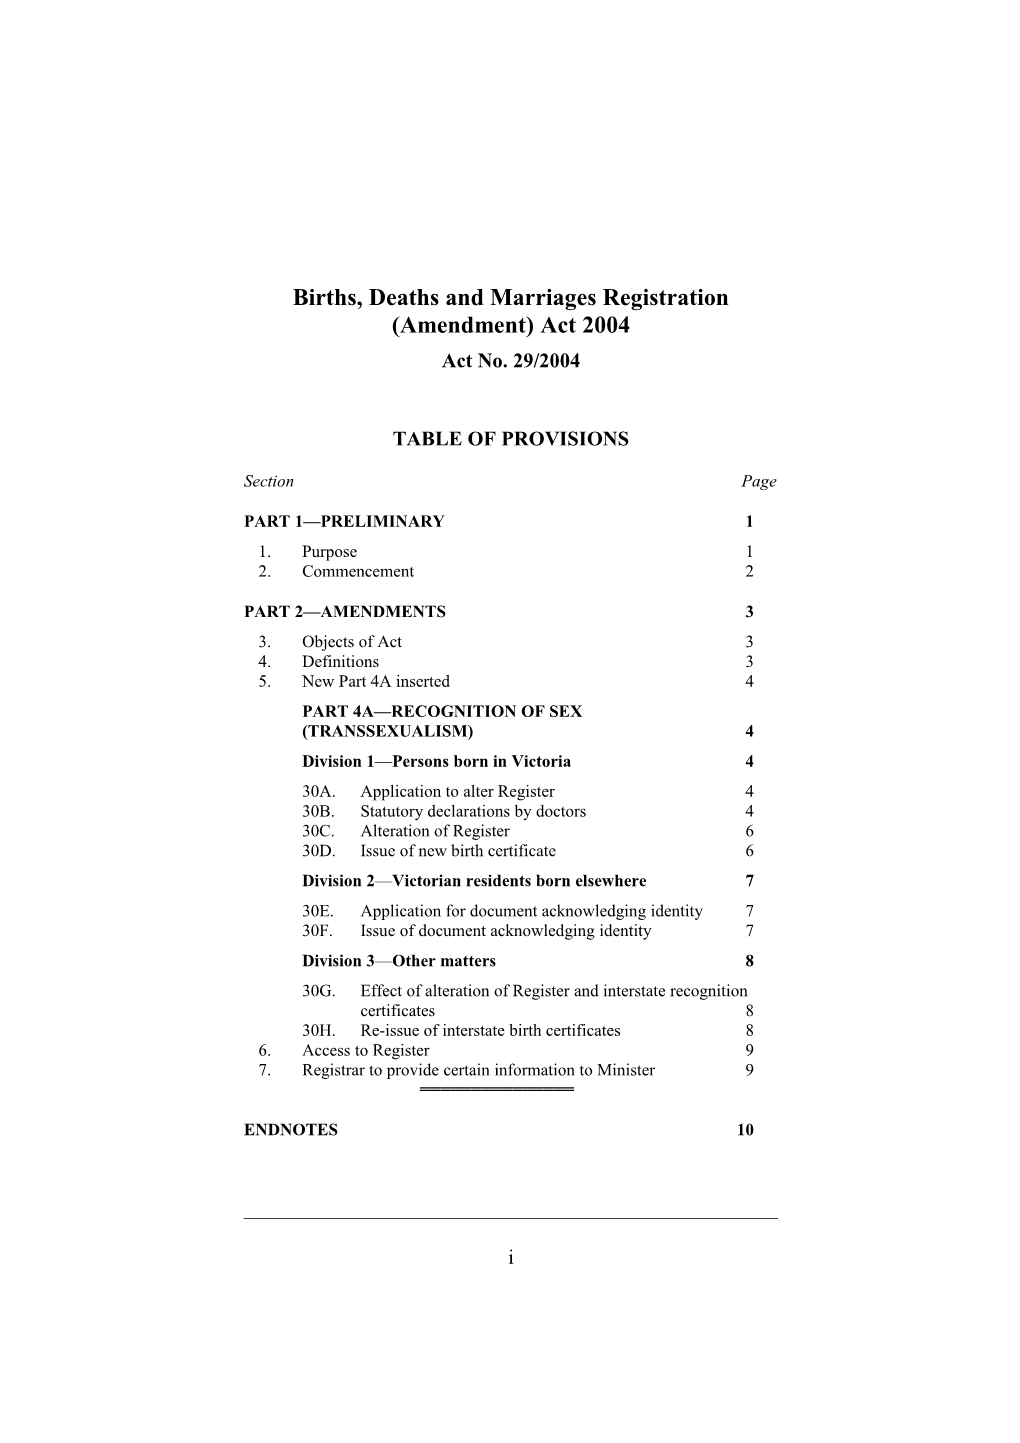 Births, Deaths and Marriages Registration (Amendment) Act 2004